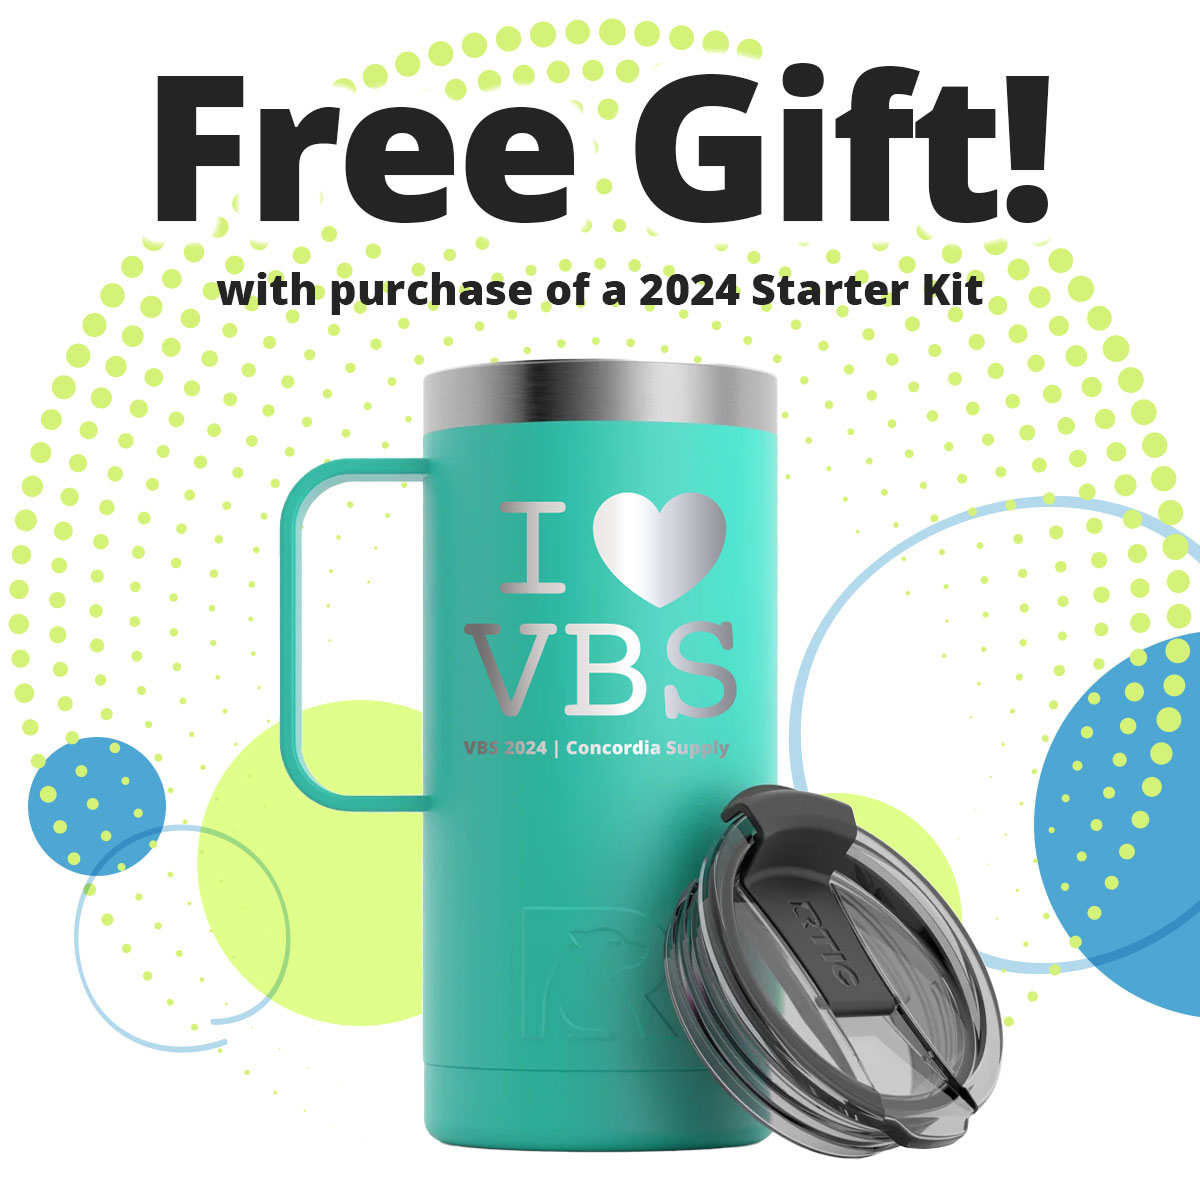 Free gift when you purchase your VBS 2024 Starter Kit